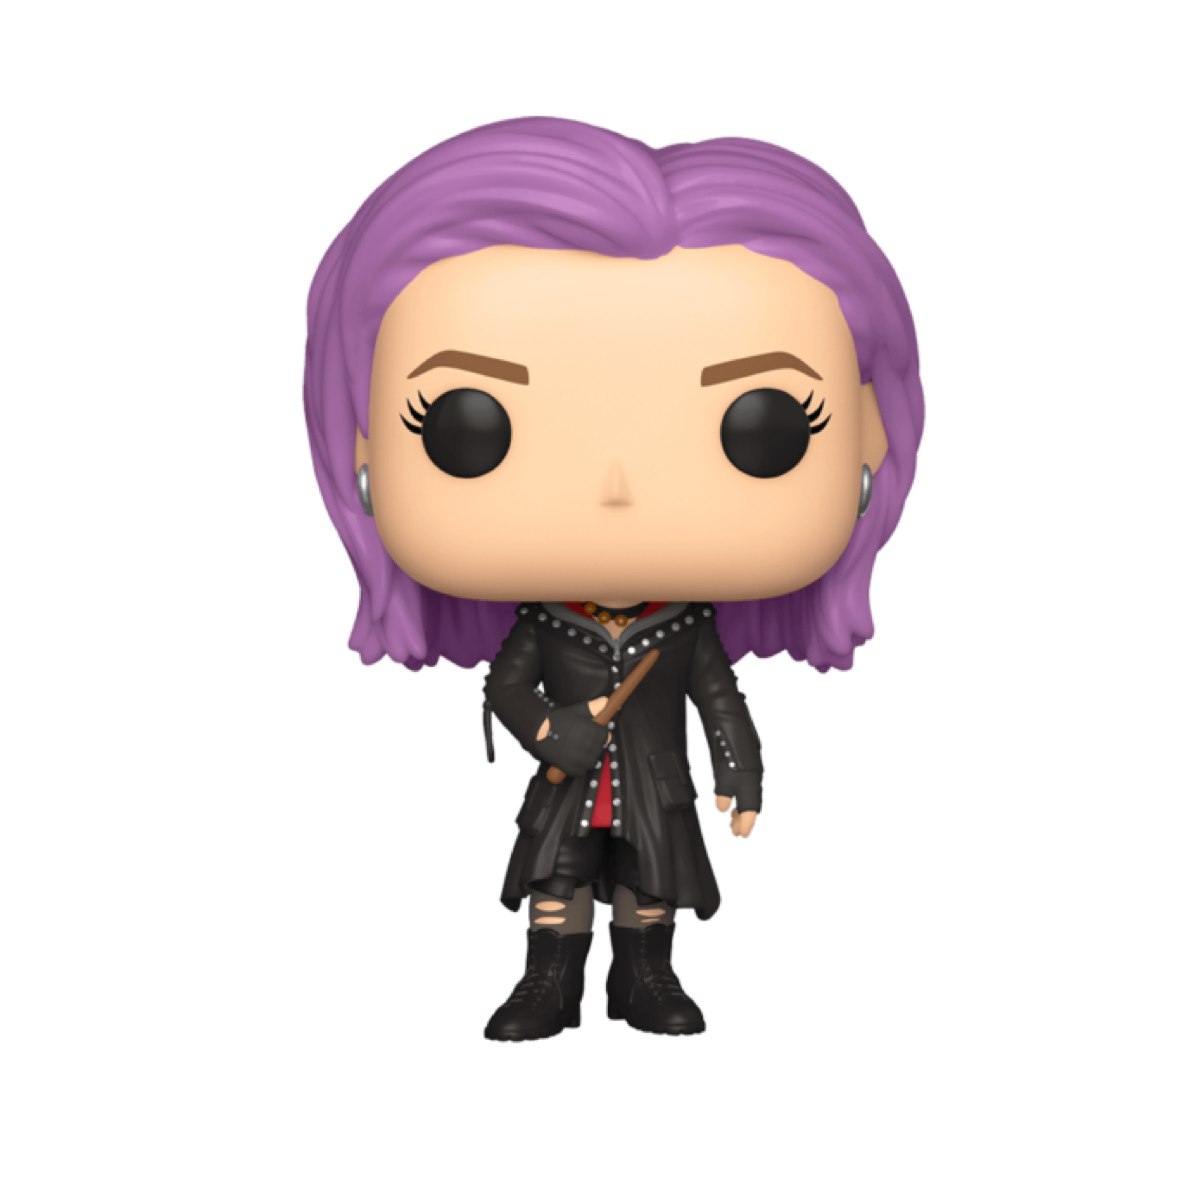 NYMPHADORA TONKS ECCC 2020 CONVENTION EXCLUSIVE MOVIES HARRY POTTER #107